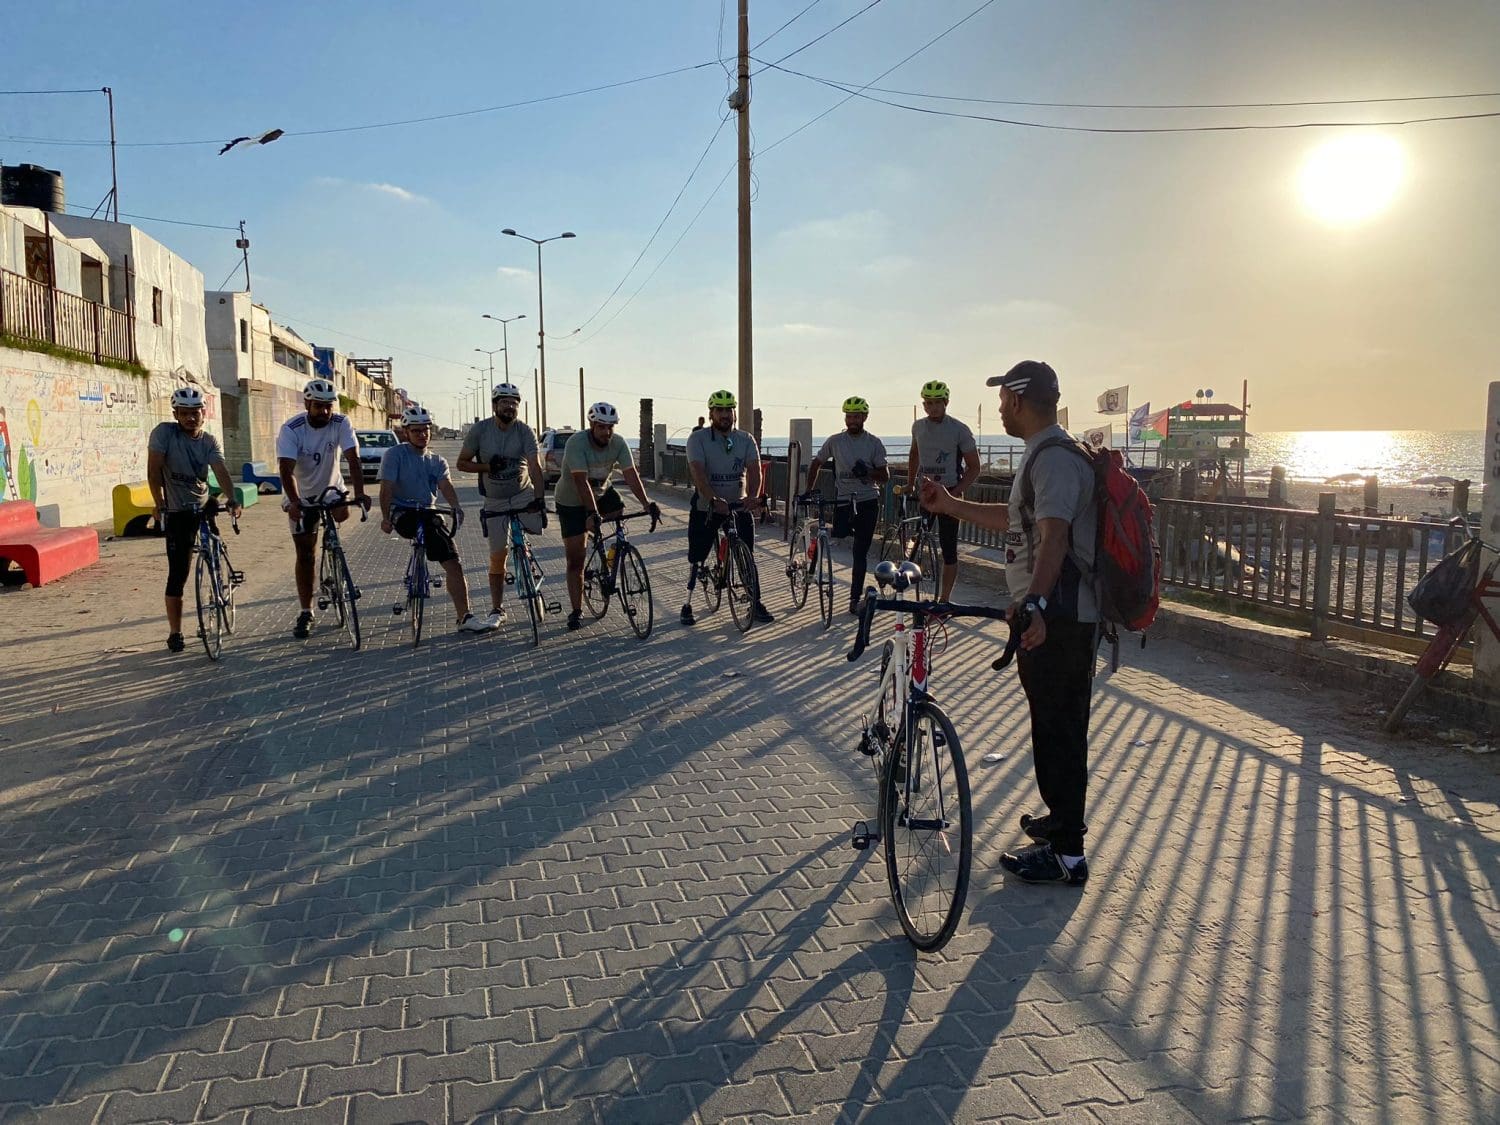 The Gaza Sunbirds on their bikes, stationary and lined up. It is nearly sunset. You can see the Mediterranean sea in the background. Their team leader is standing talking to them. 